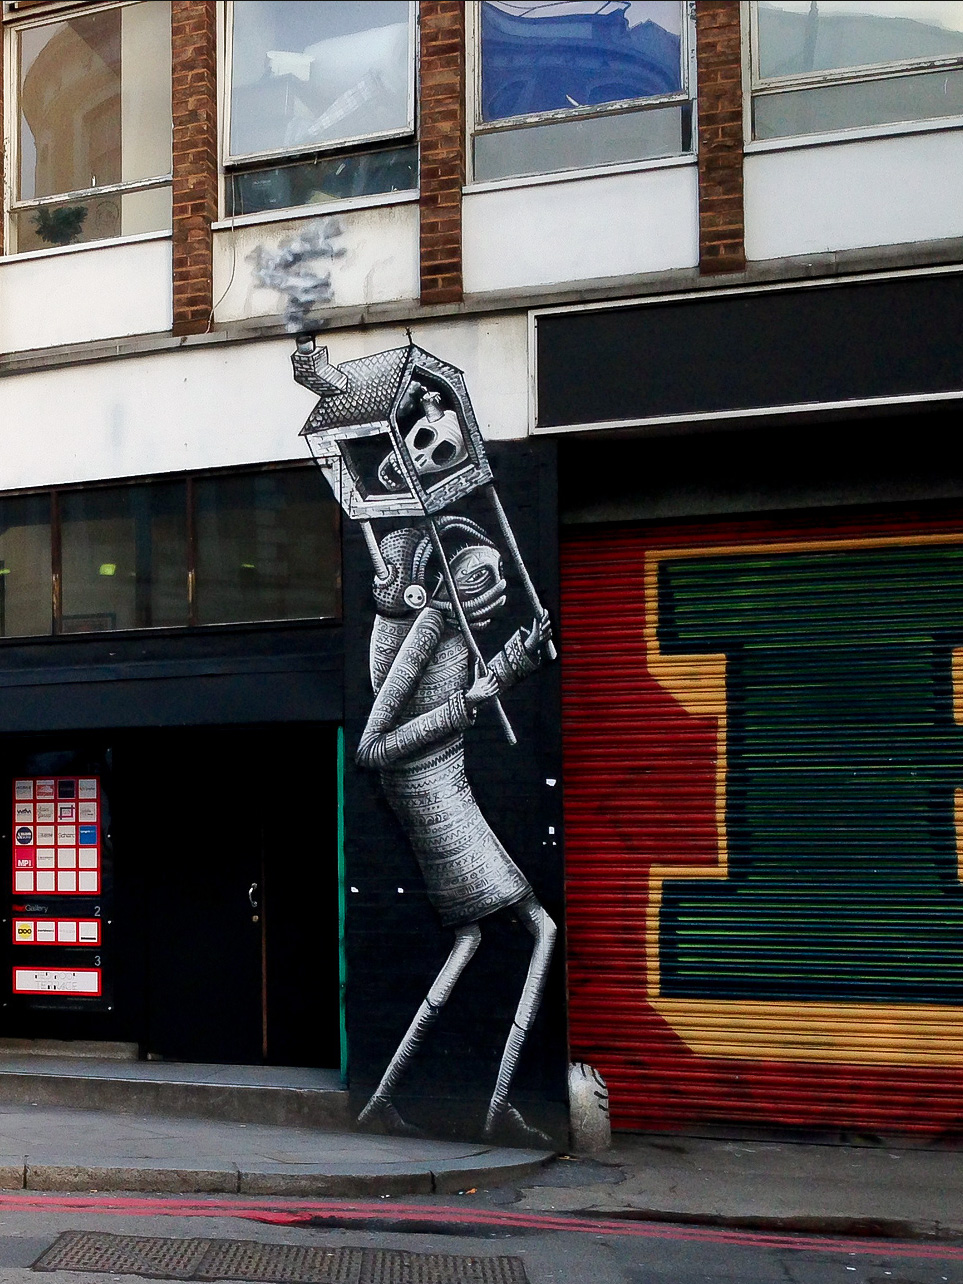 Phlegm's black and white figures in London.